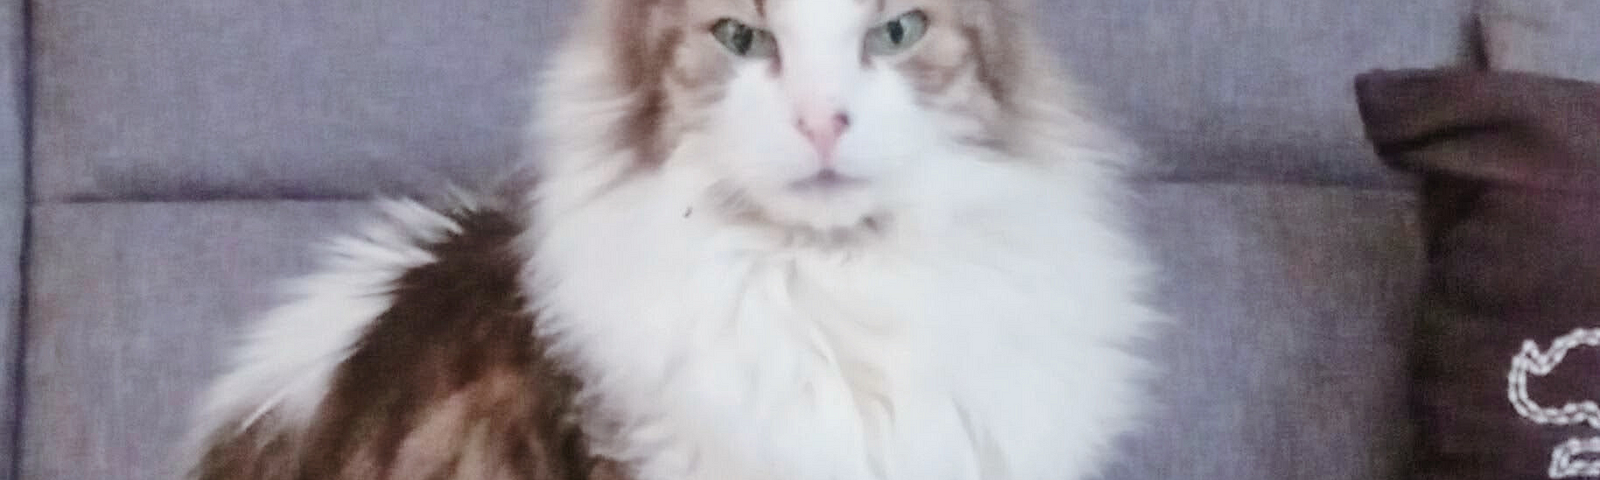 Photo of Max, the author's 15-year-old cat sitting on a grey couch. Max is long-haired, white, and grey with hints of brown. His eyes are green and his breed is unknown with the best guess suggesting Norwegian Forrest.